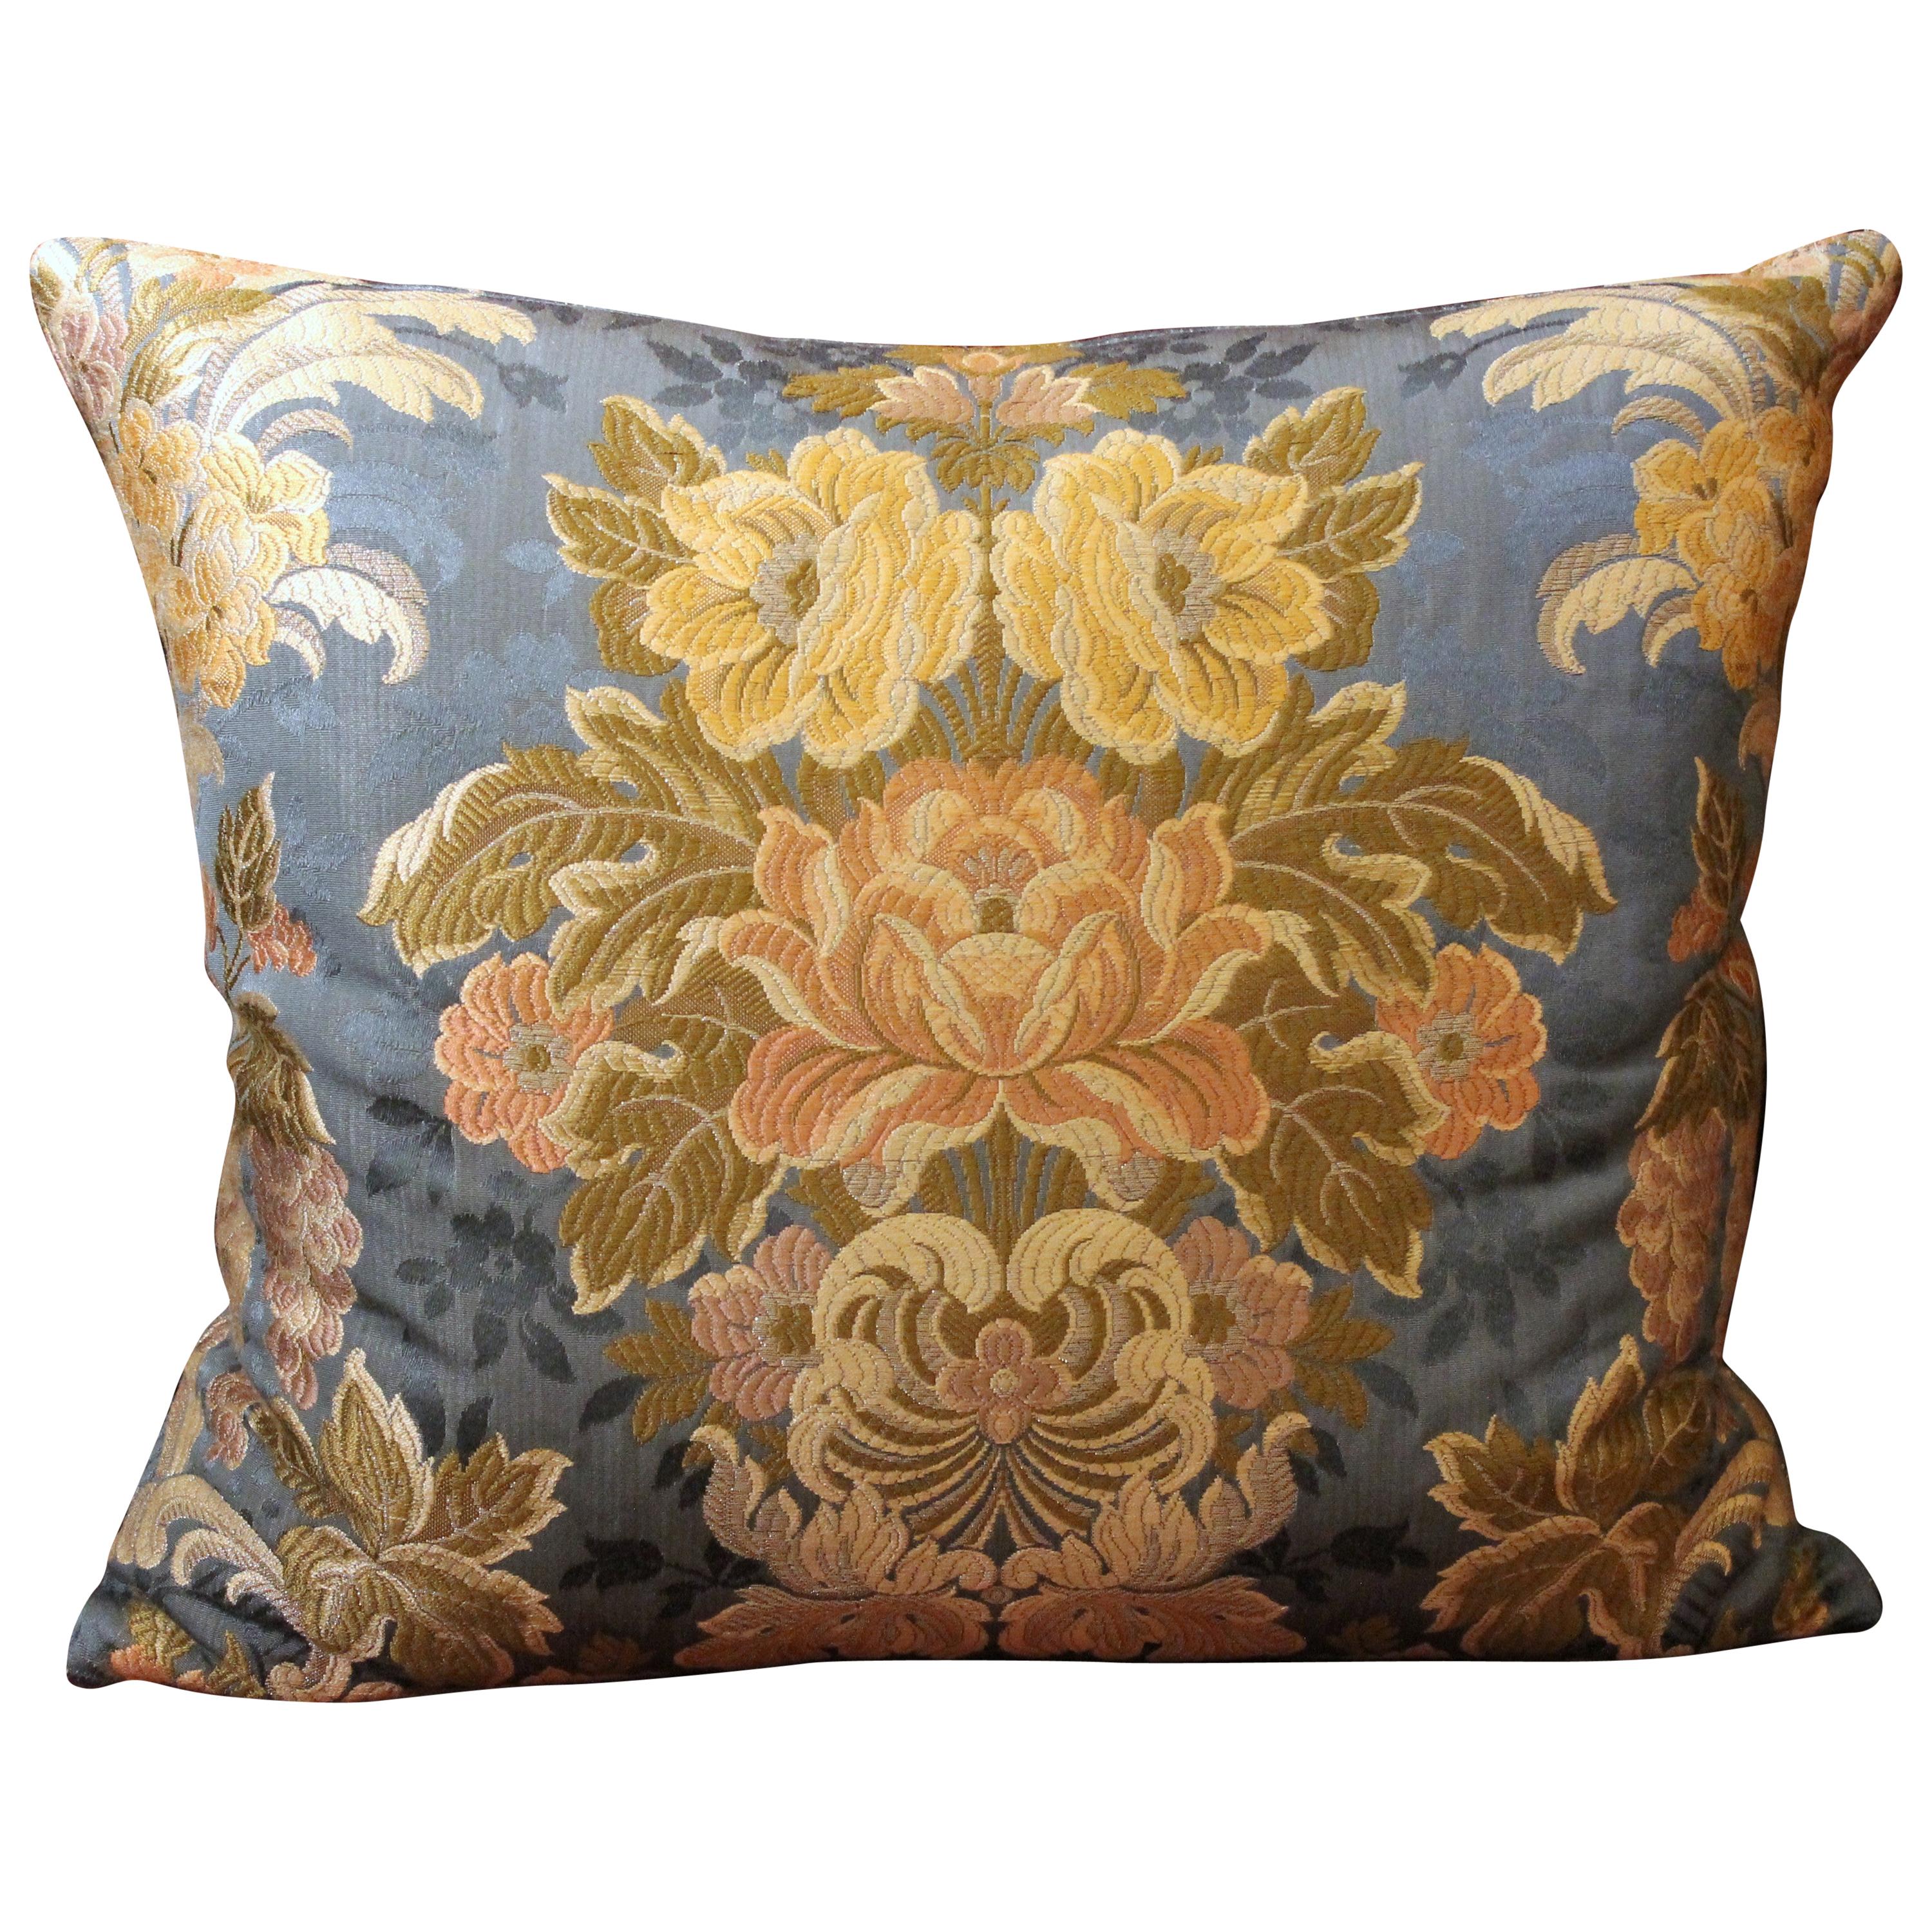 Italian Decorative Throw Pillows with Floral Pattern Cotton Brocade Fabric For Sale